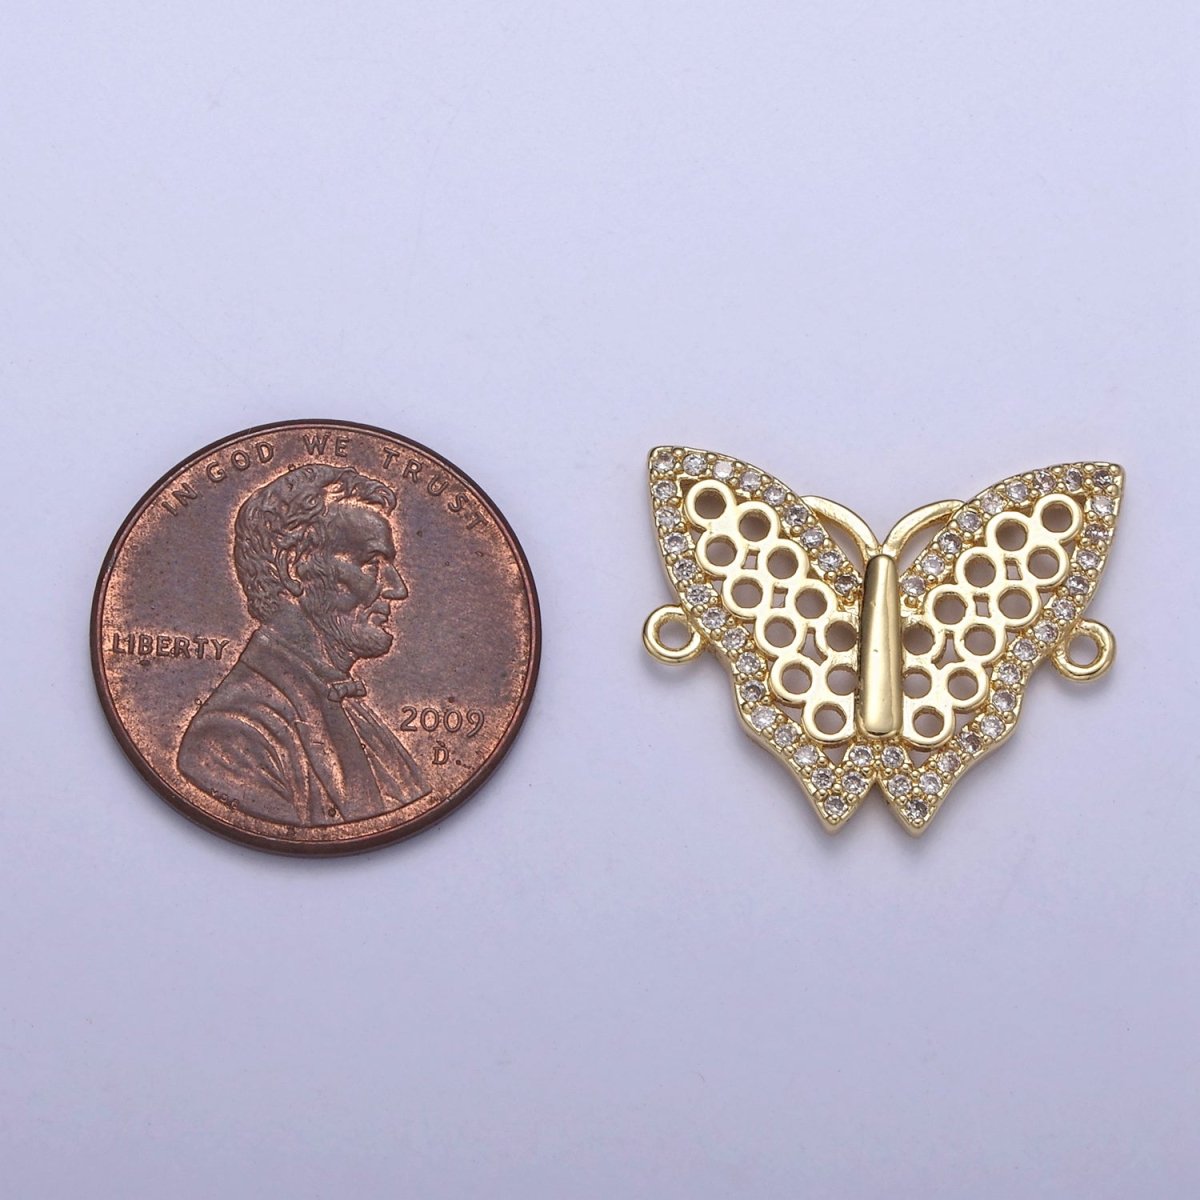 Dainty Gold Mariposa Butterfly Charm Connector for Bracelet Necklace Supply F-682 - DLUXCA